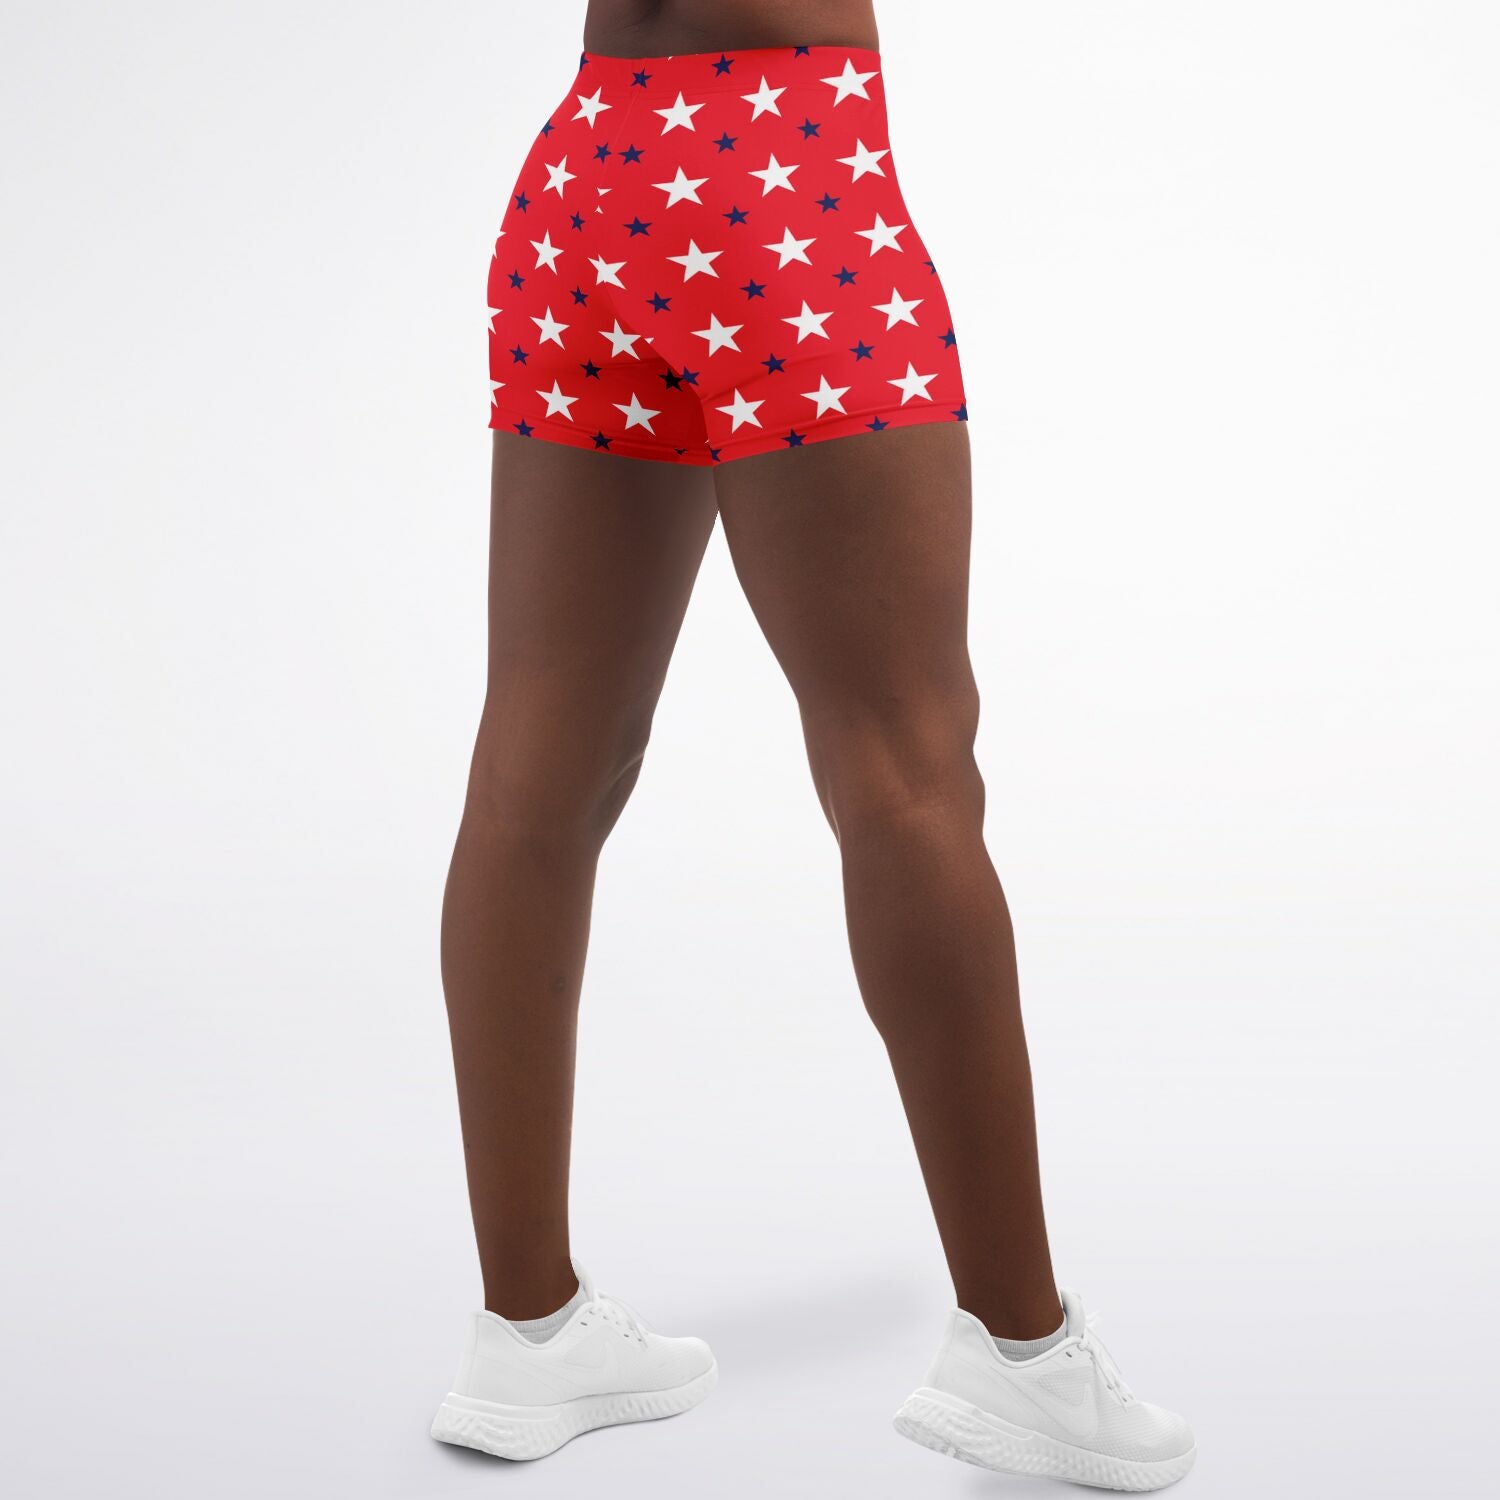 Women's Mid-rise Red White Blue USA Stars Athletic Booty Shorts